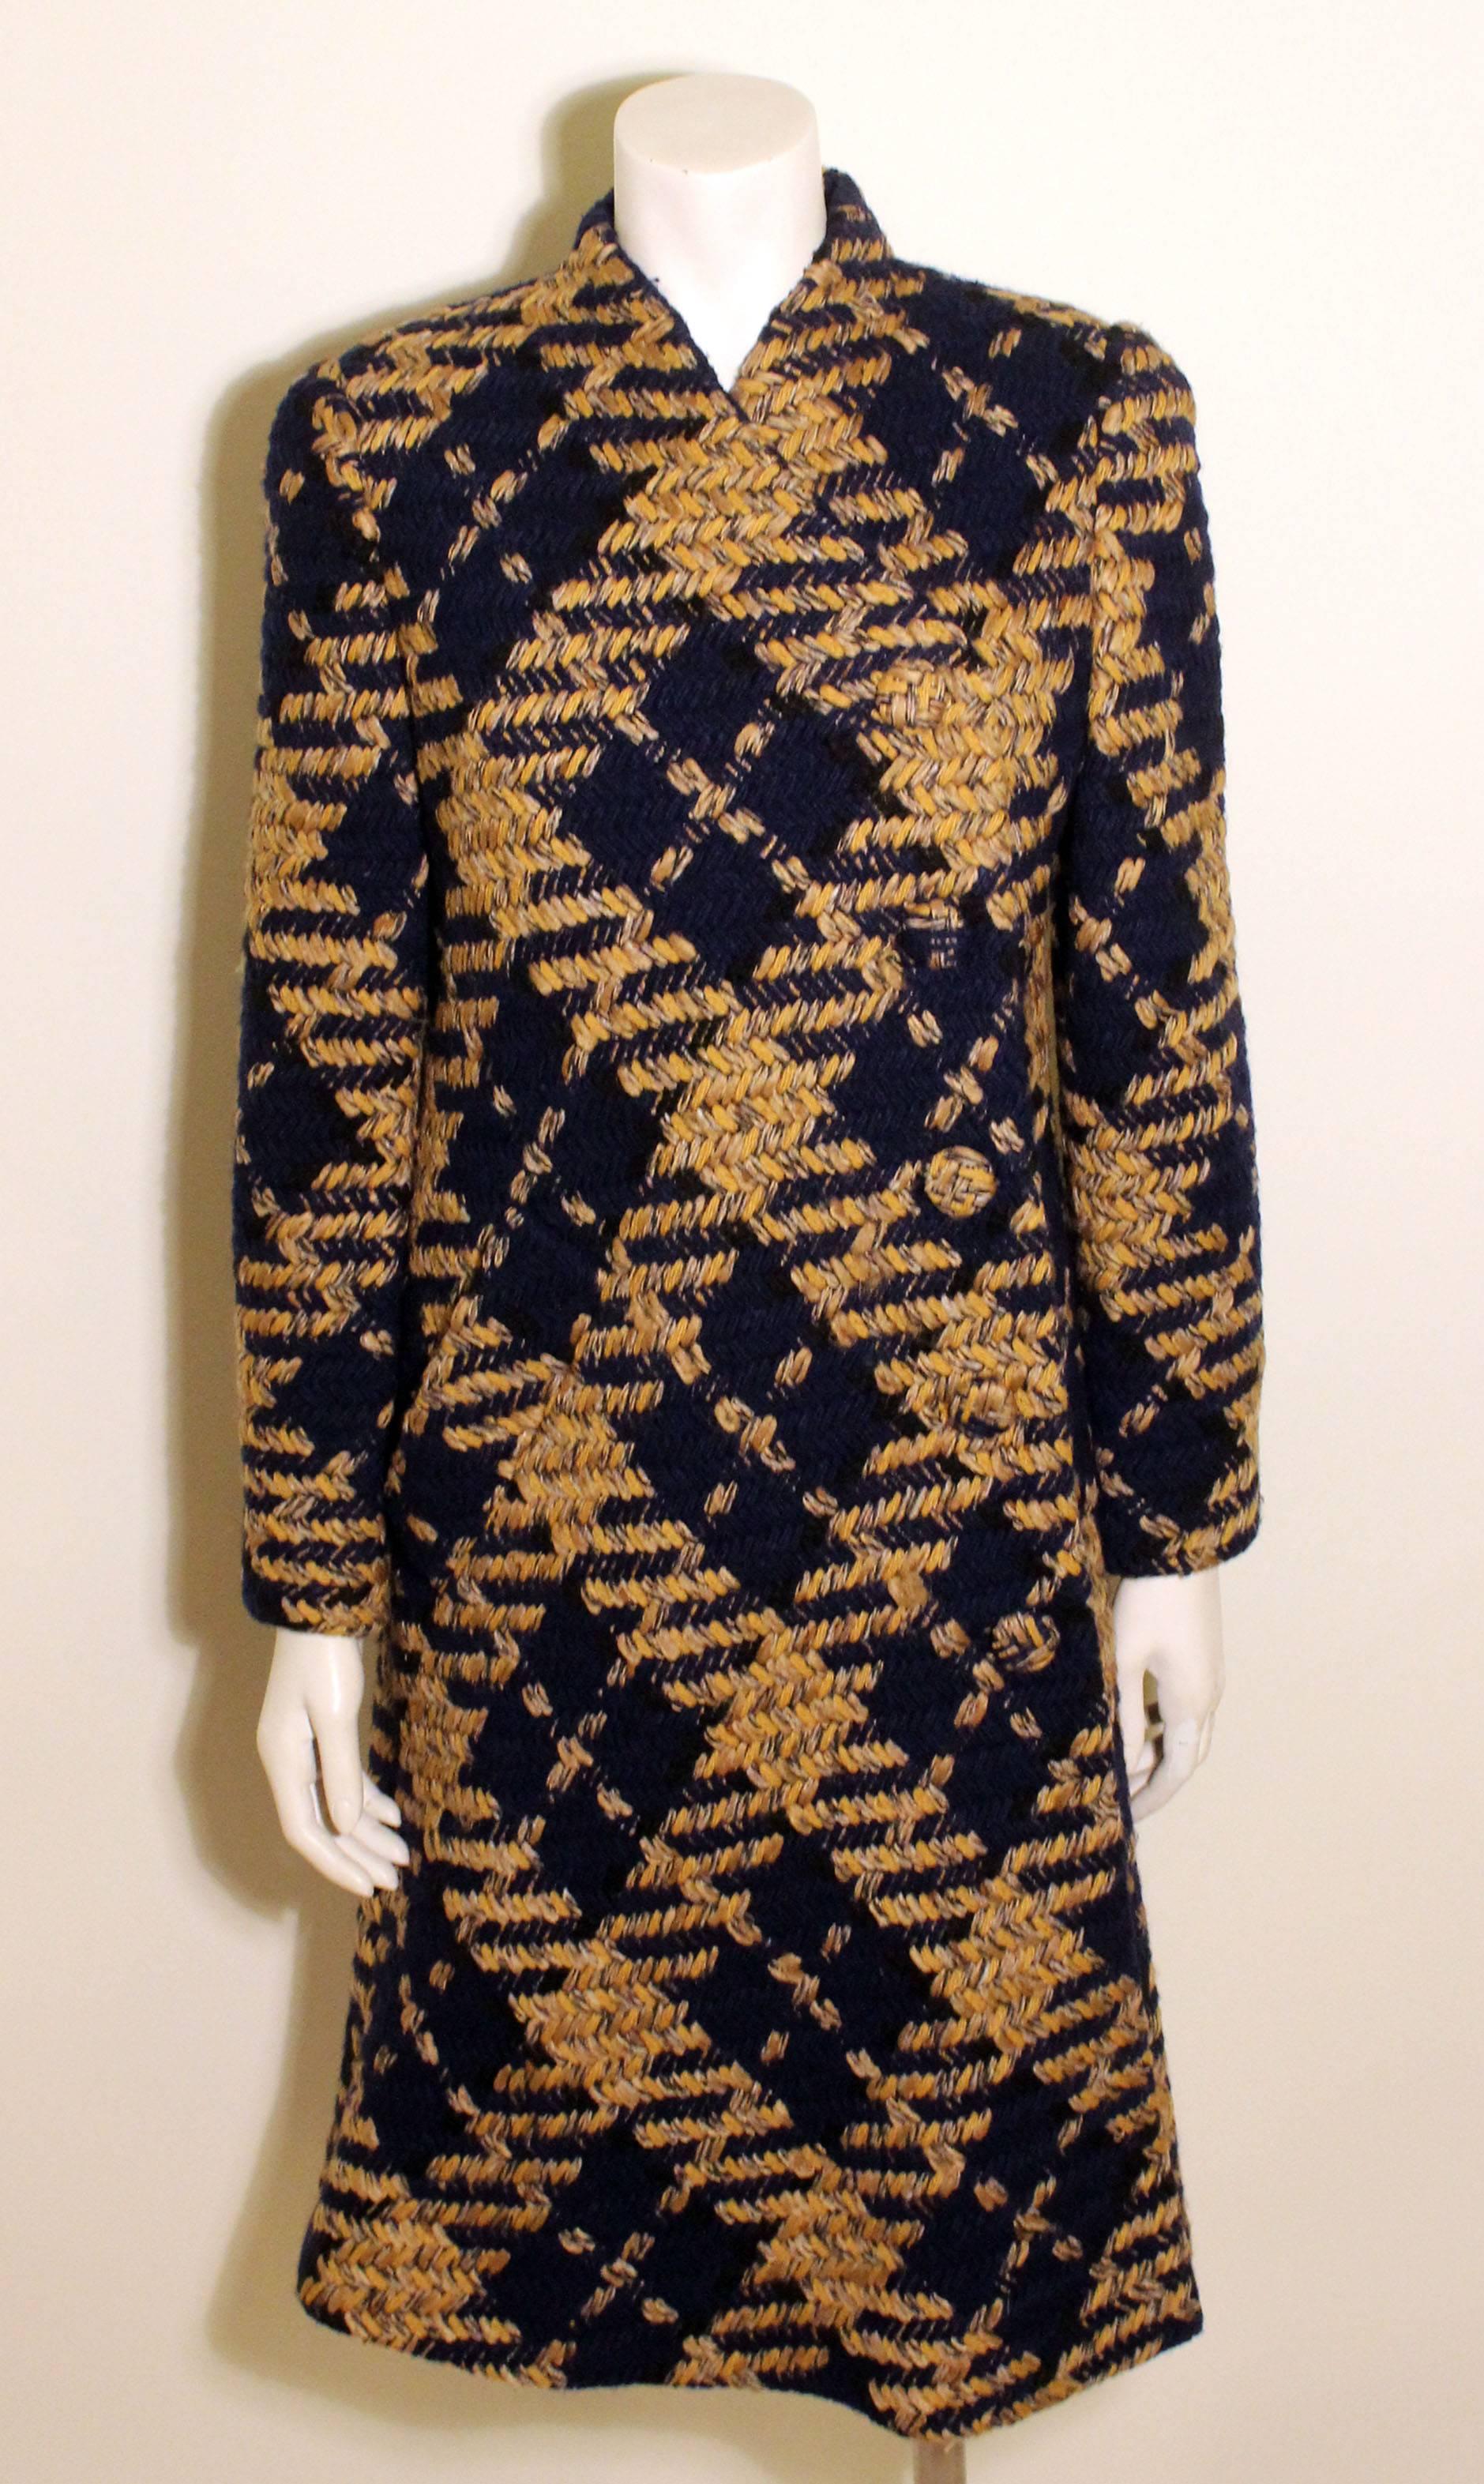 This Trigere coat is a beautiful navy, gold, and mustard tweed. It has interesting detail in that it closes on the diagonal with covered buttons and has a single front pocket.